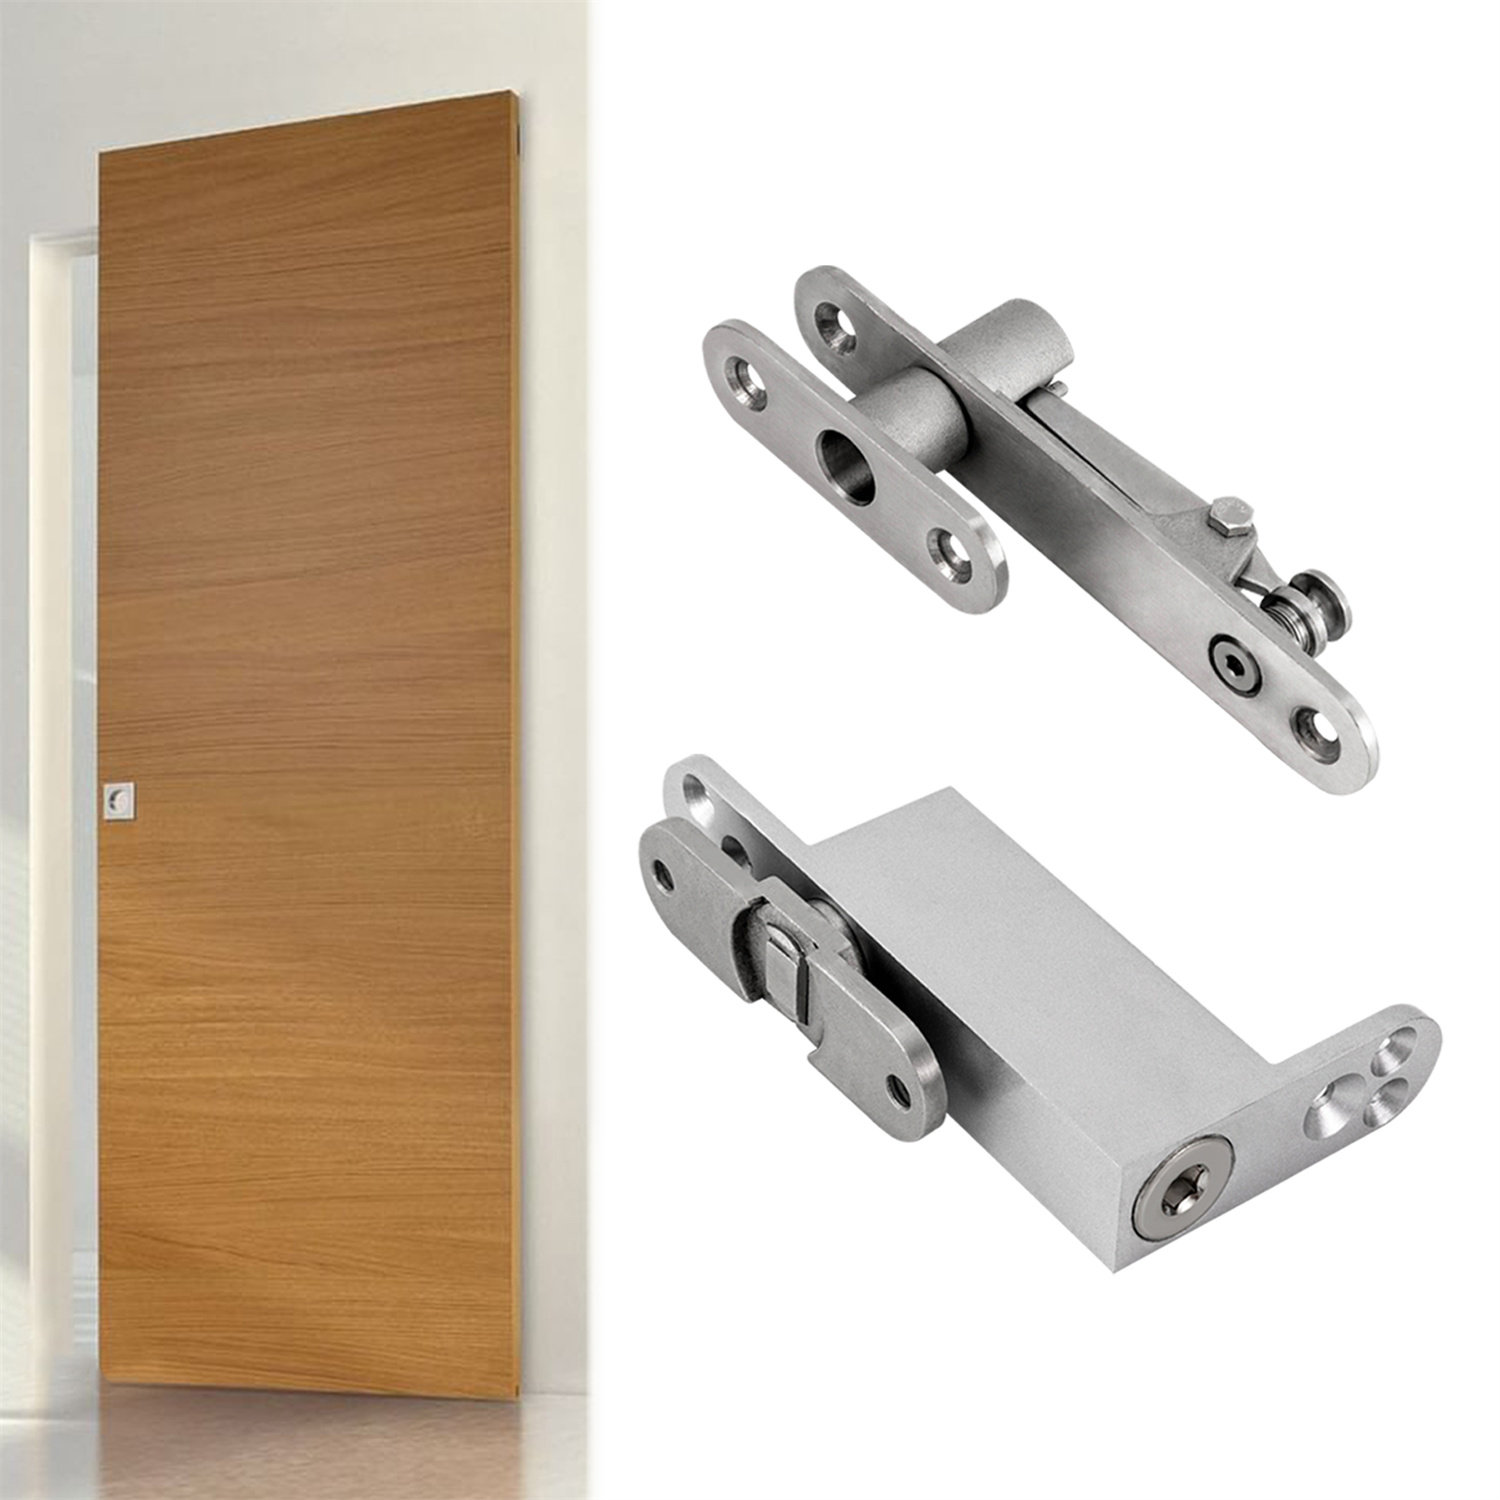 3.74 H × 2.84 W Invisible/Concealed Pair Door Hinges